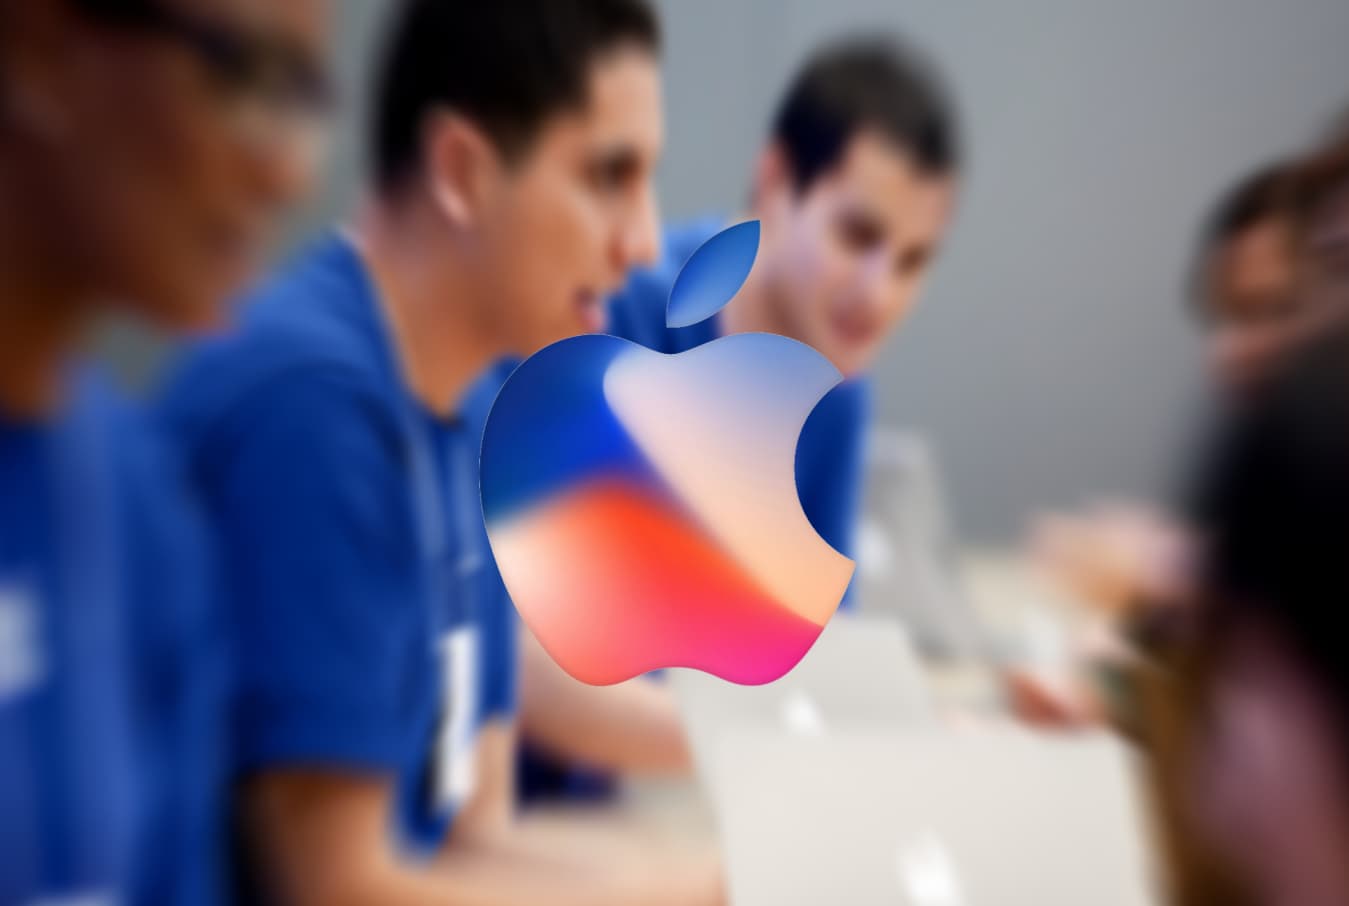 Teen hacked Apple to impress the company hoping for job